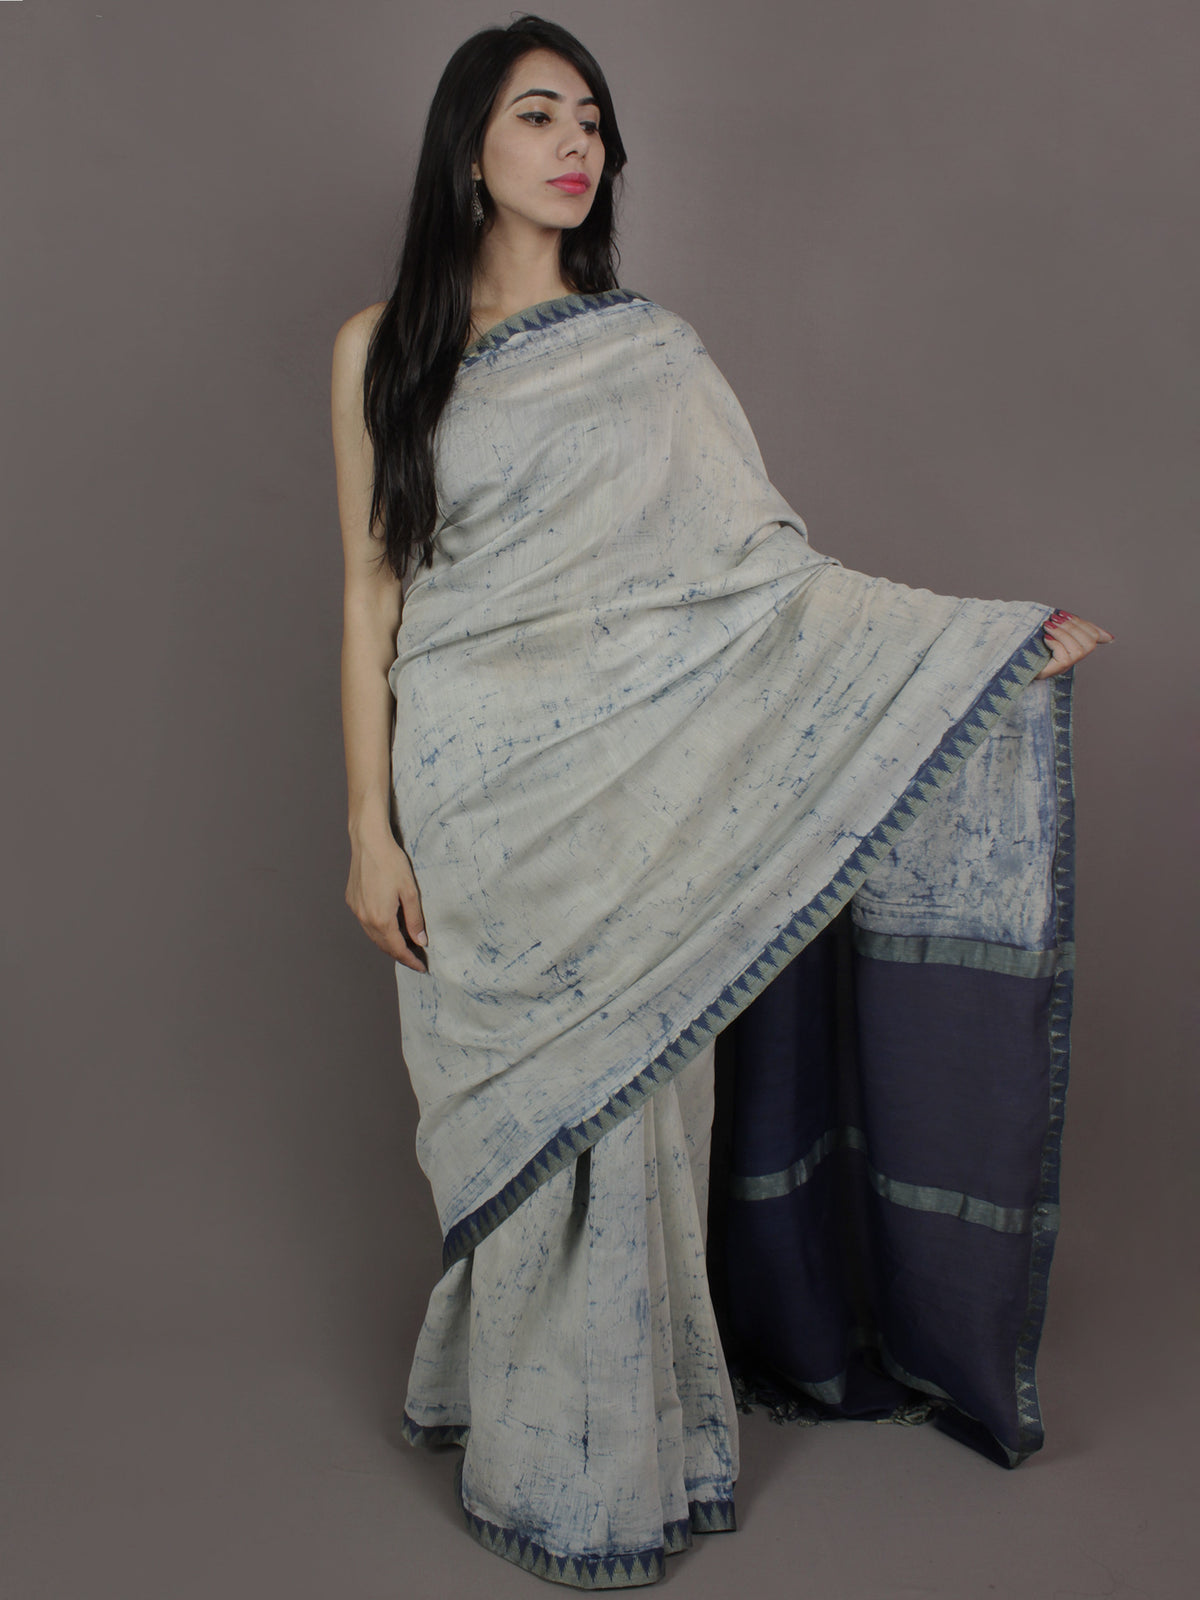 Indigo Ivory Hand Painted in Natural Colors Chanderi Saree With Ghicha Border - S031701147